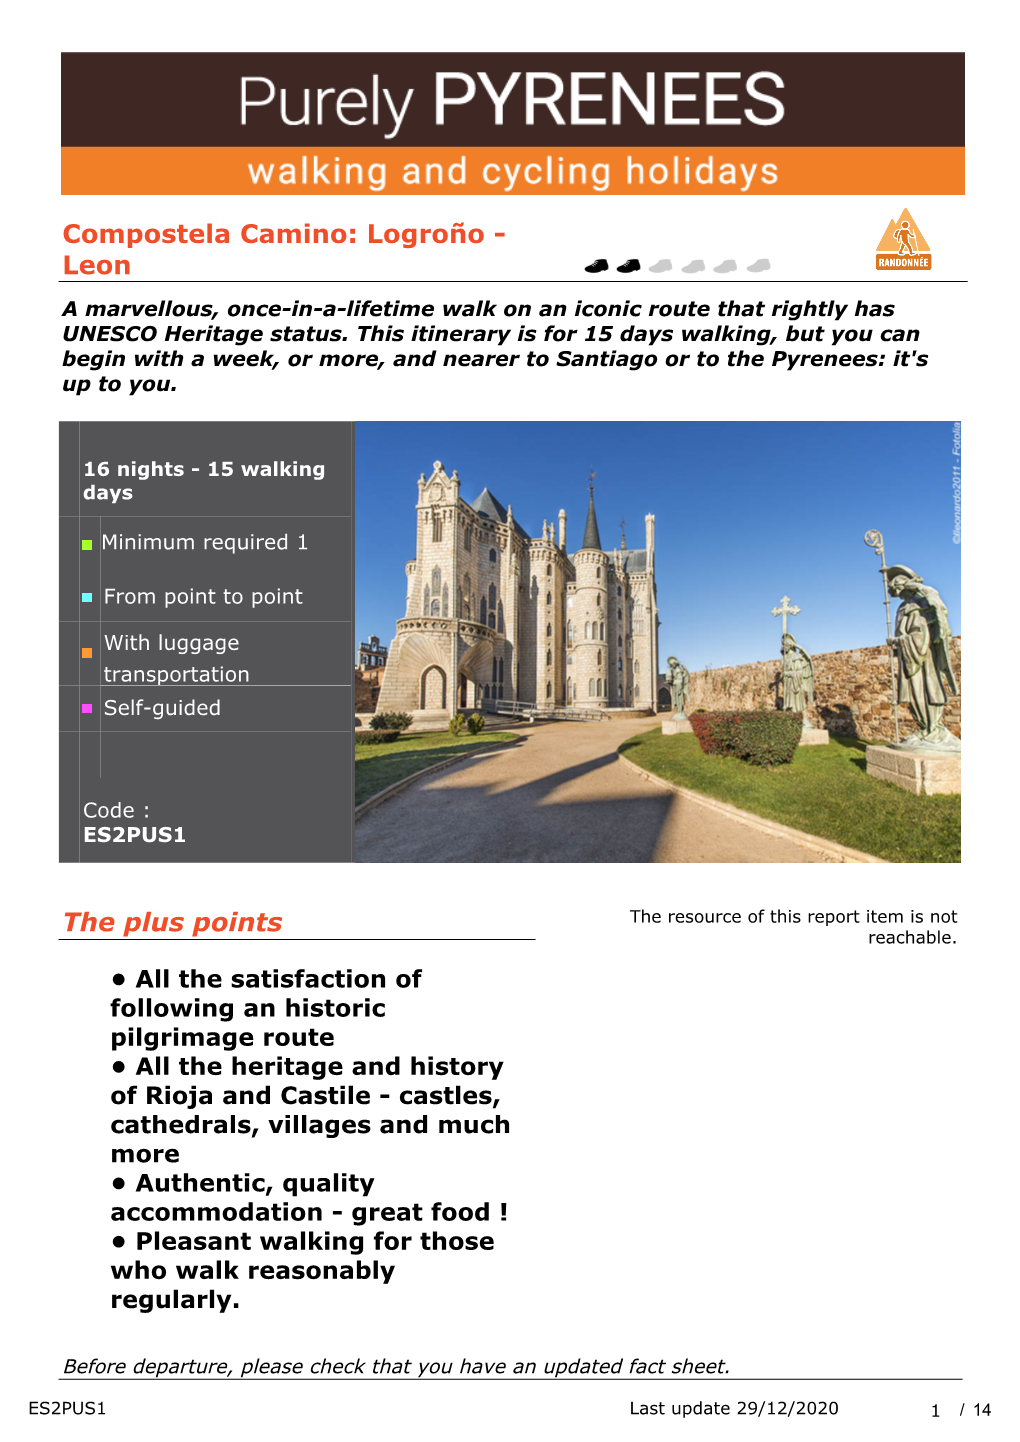 Compostela Camino: Logroño - Leon a Marvellous, Once-In-A-Lifetime Walk on an Iconic Route That Rightly Has UNESCO Heritage Status